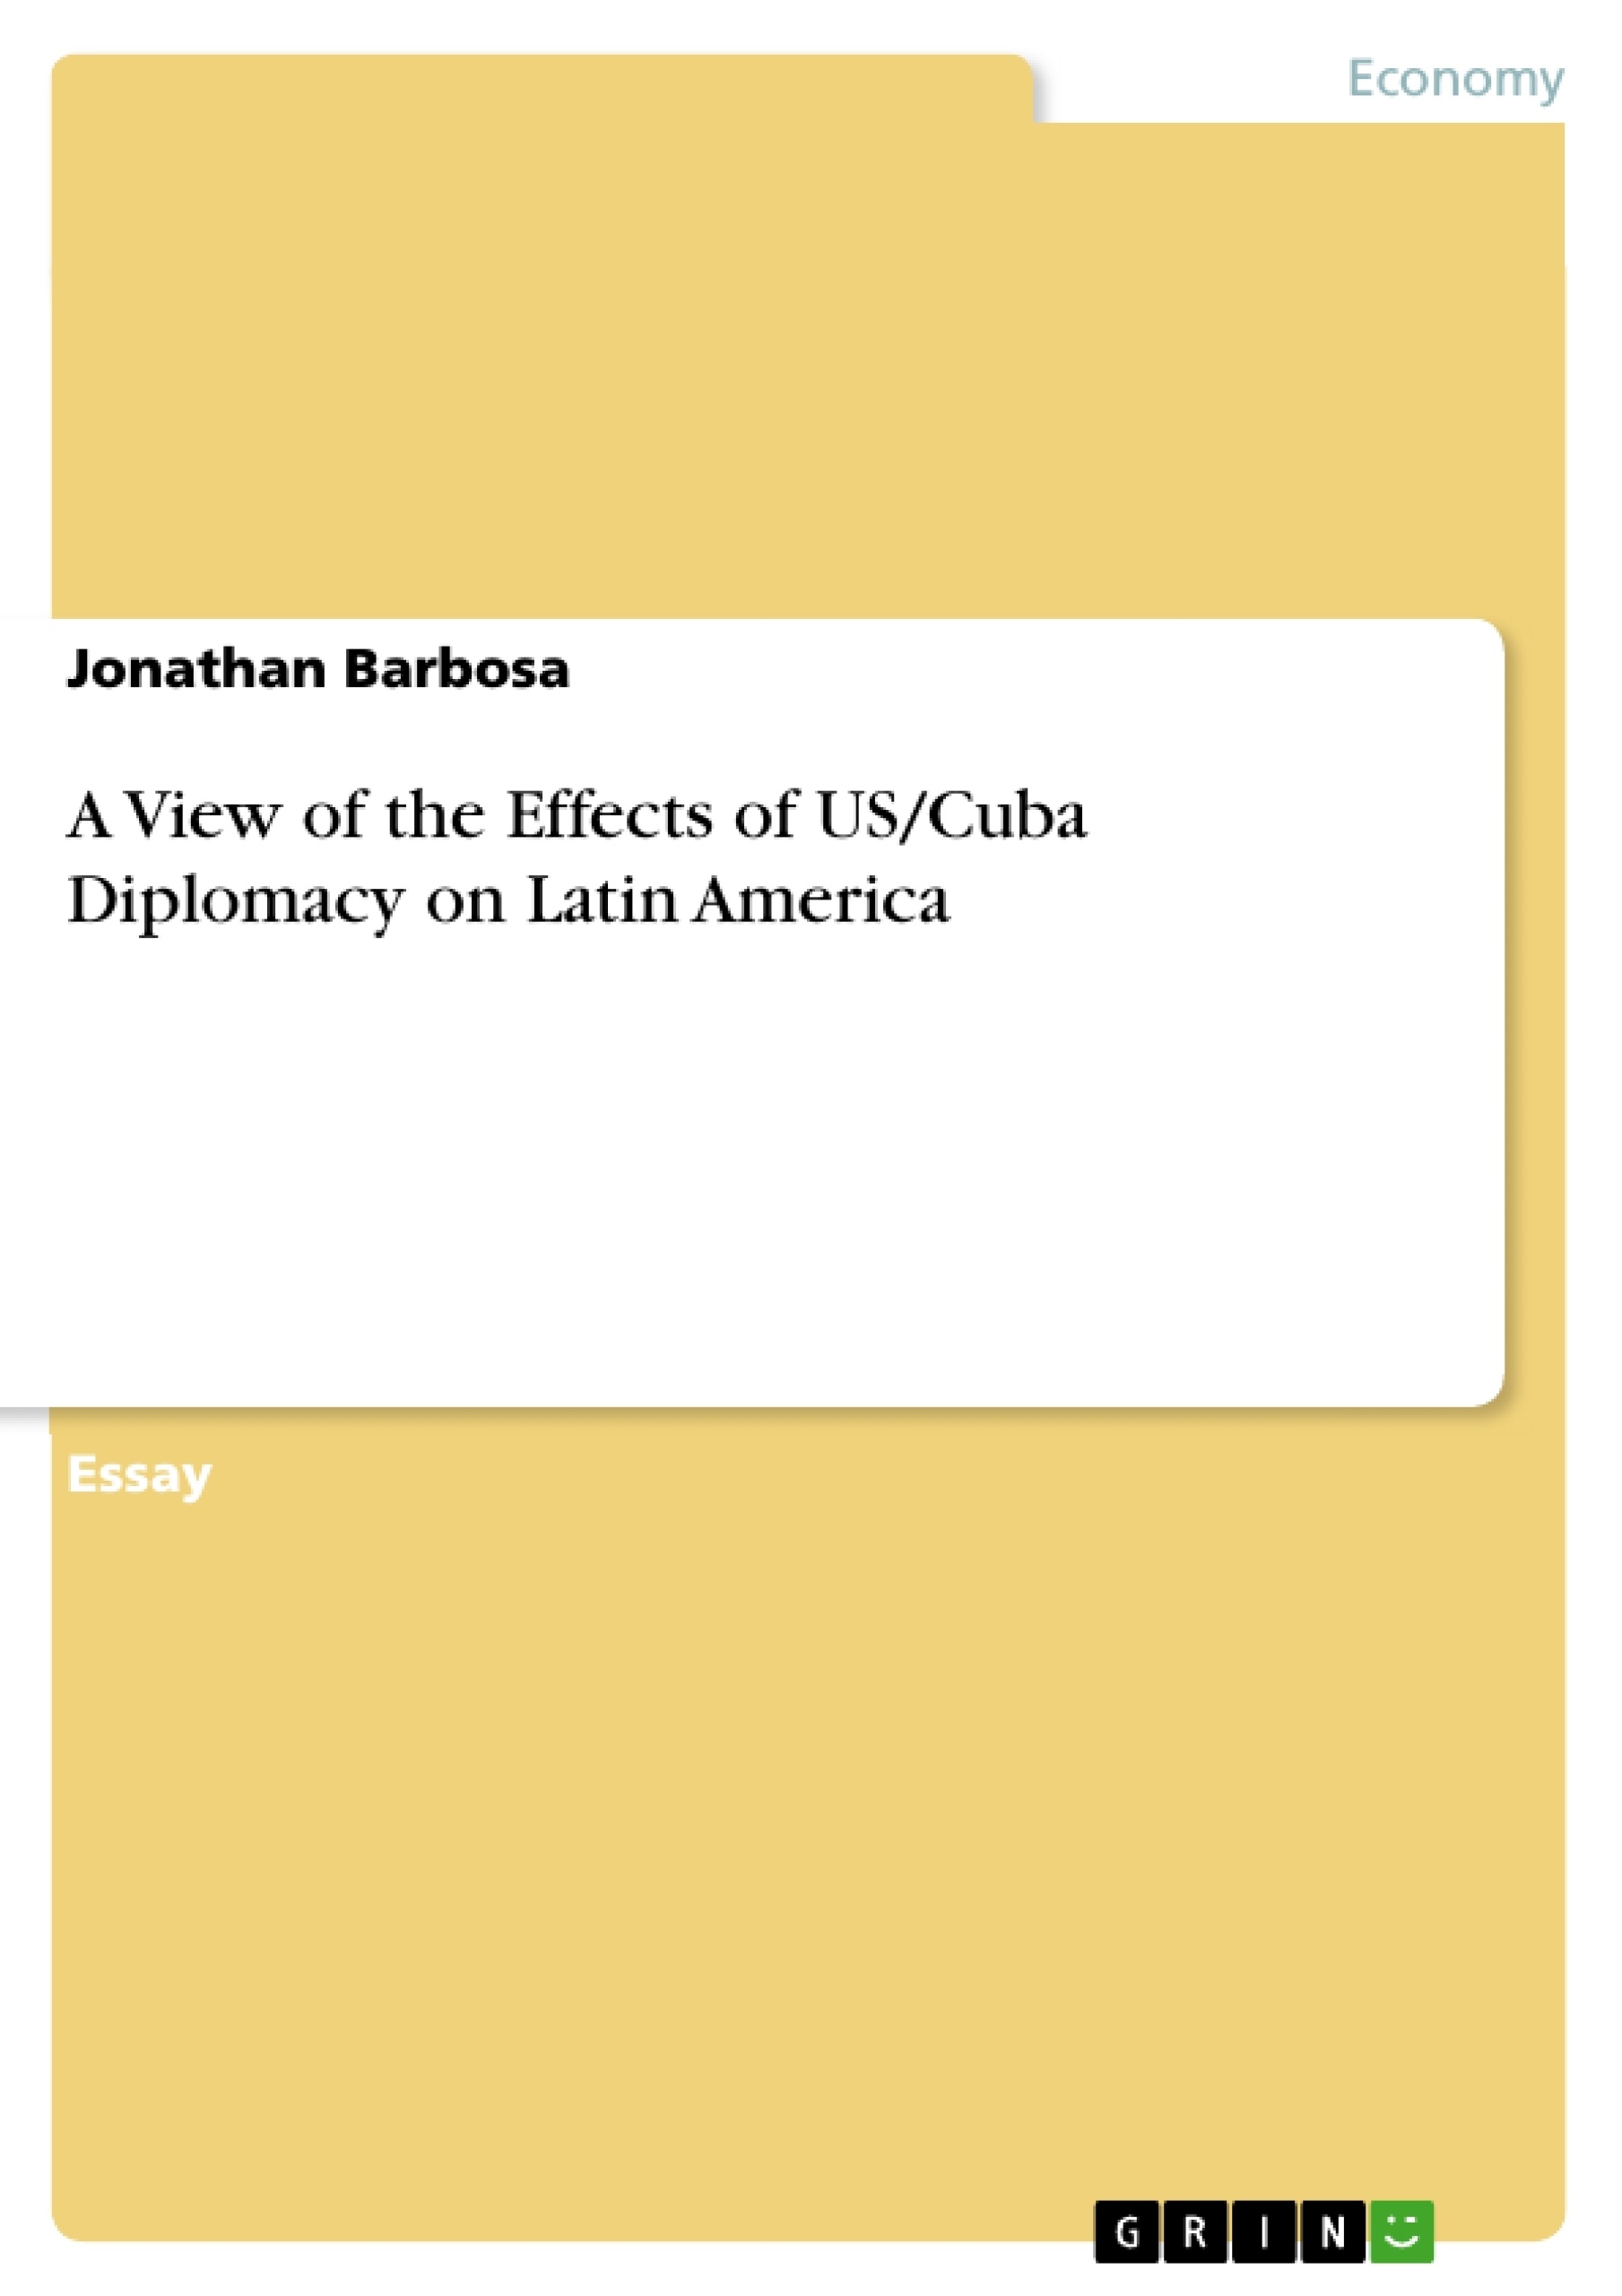 Titre: A View of the Effects of US/Cuba Diplomacy on Latin America